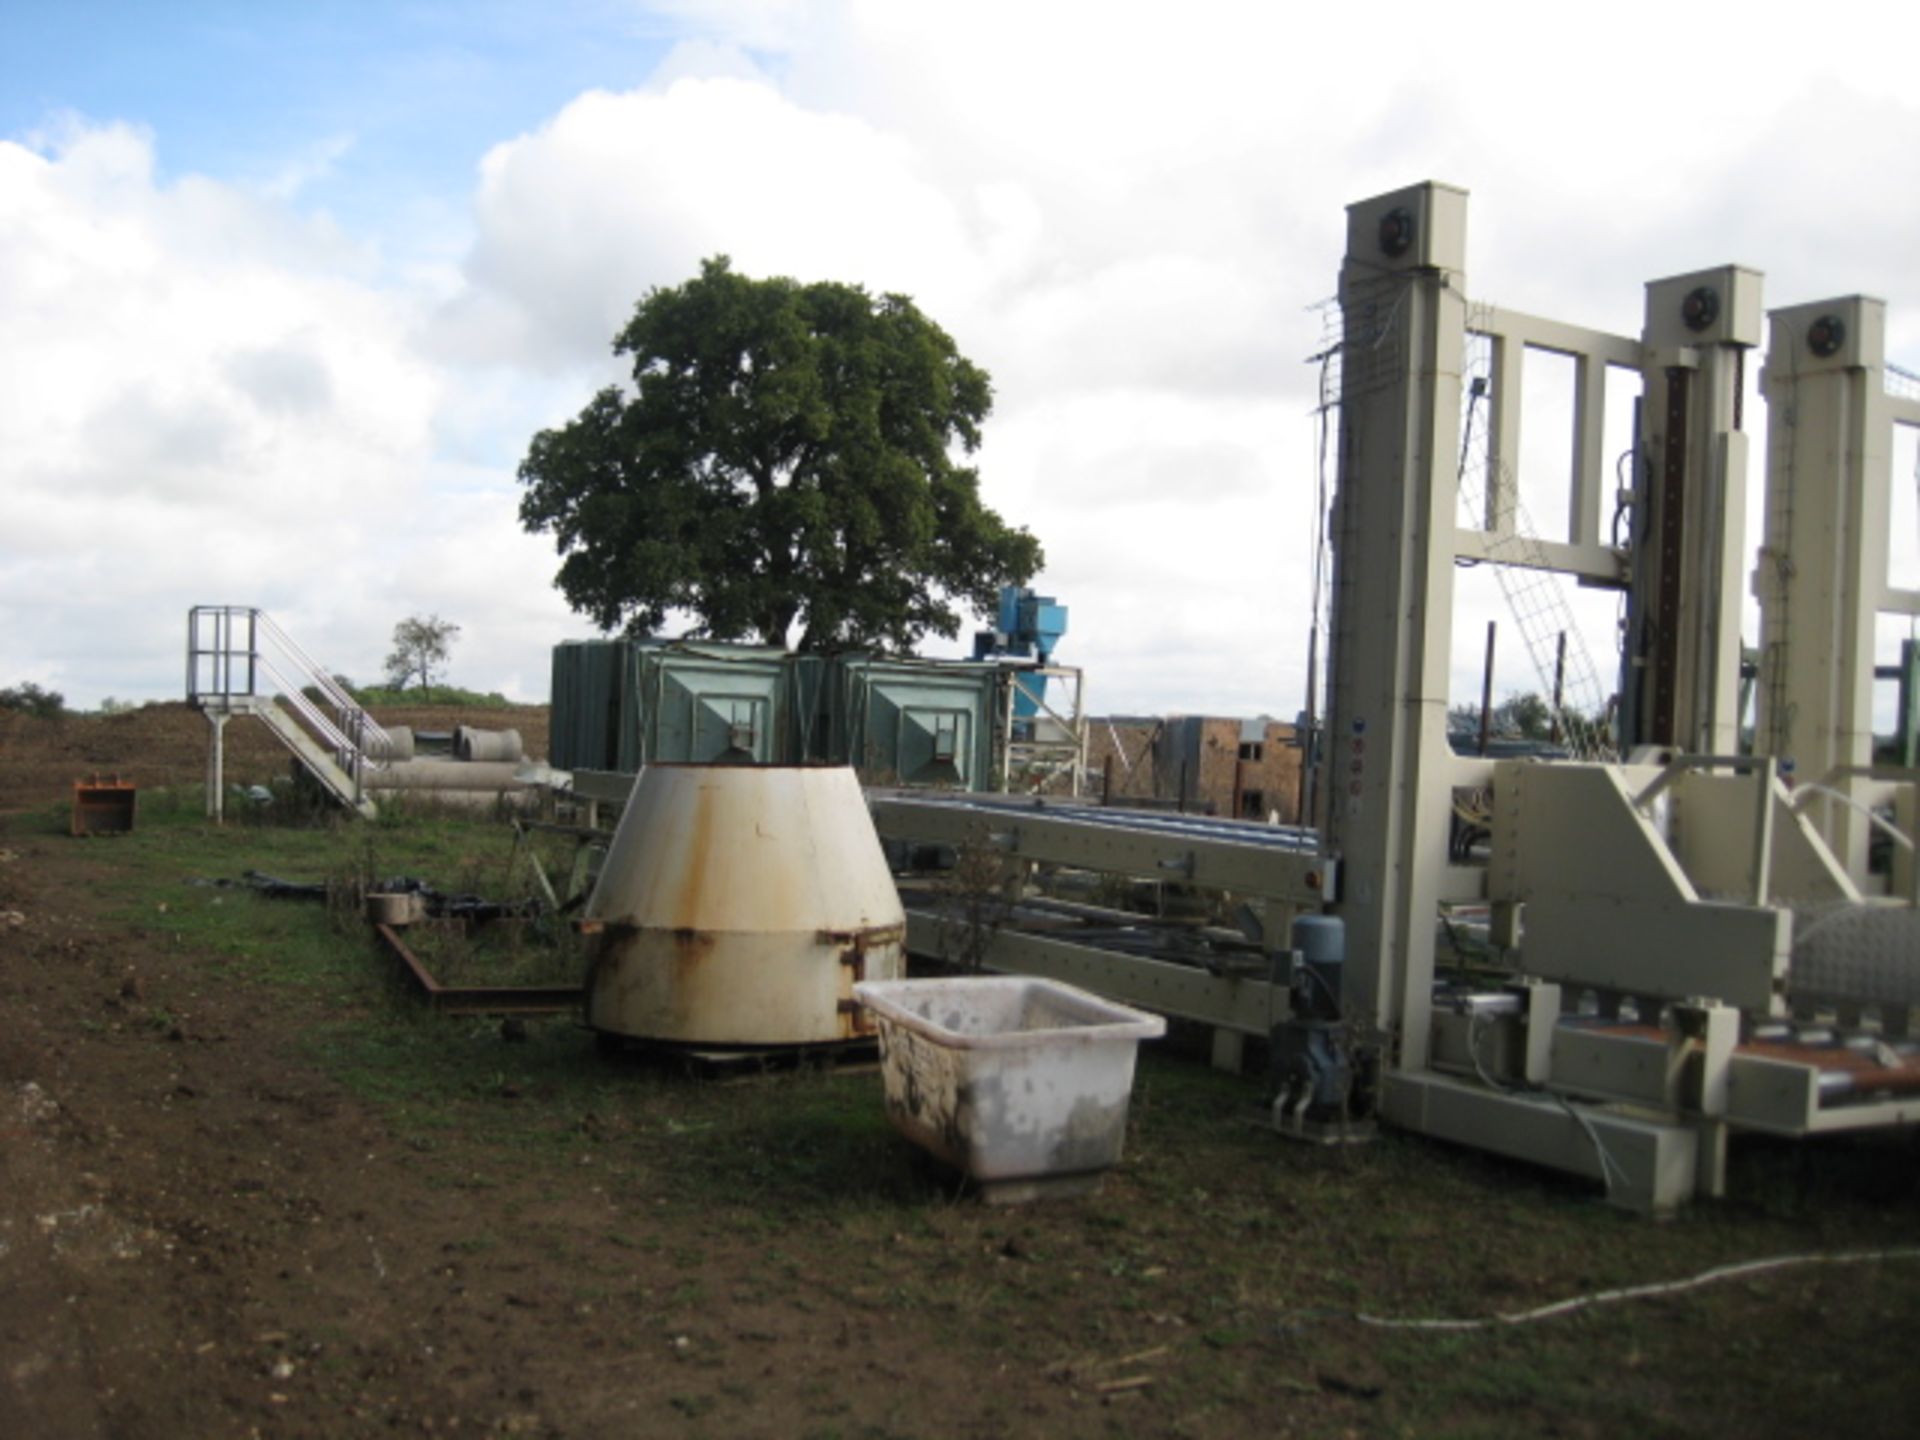 Bale Destacker - Garbuio Dickenson stacking/destacking unit for handling baled products. It has